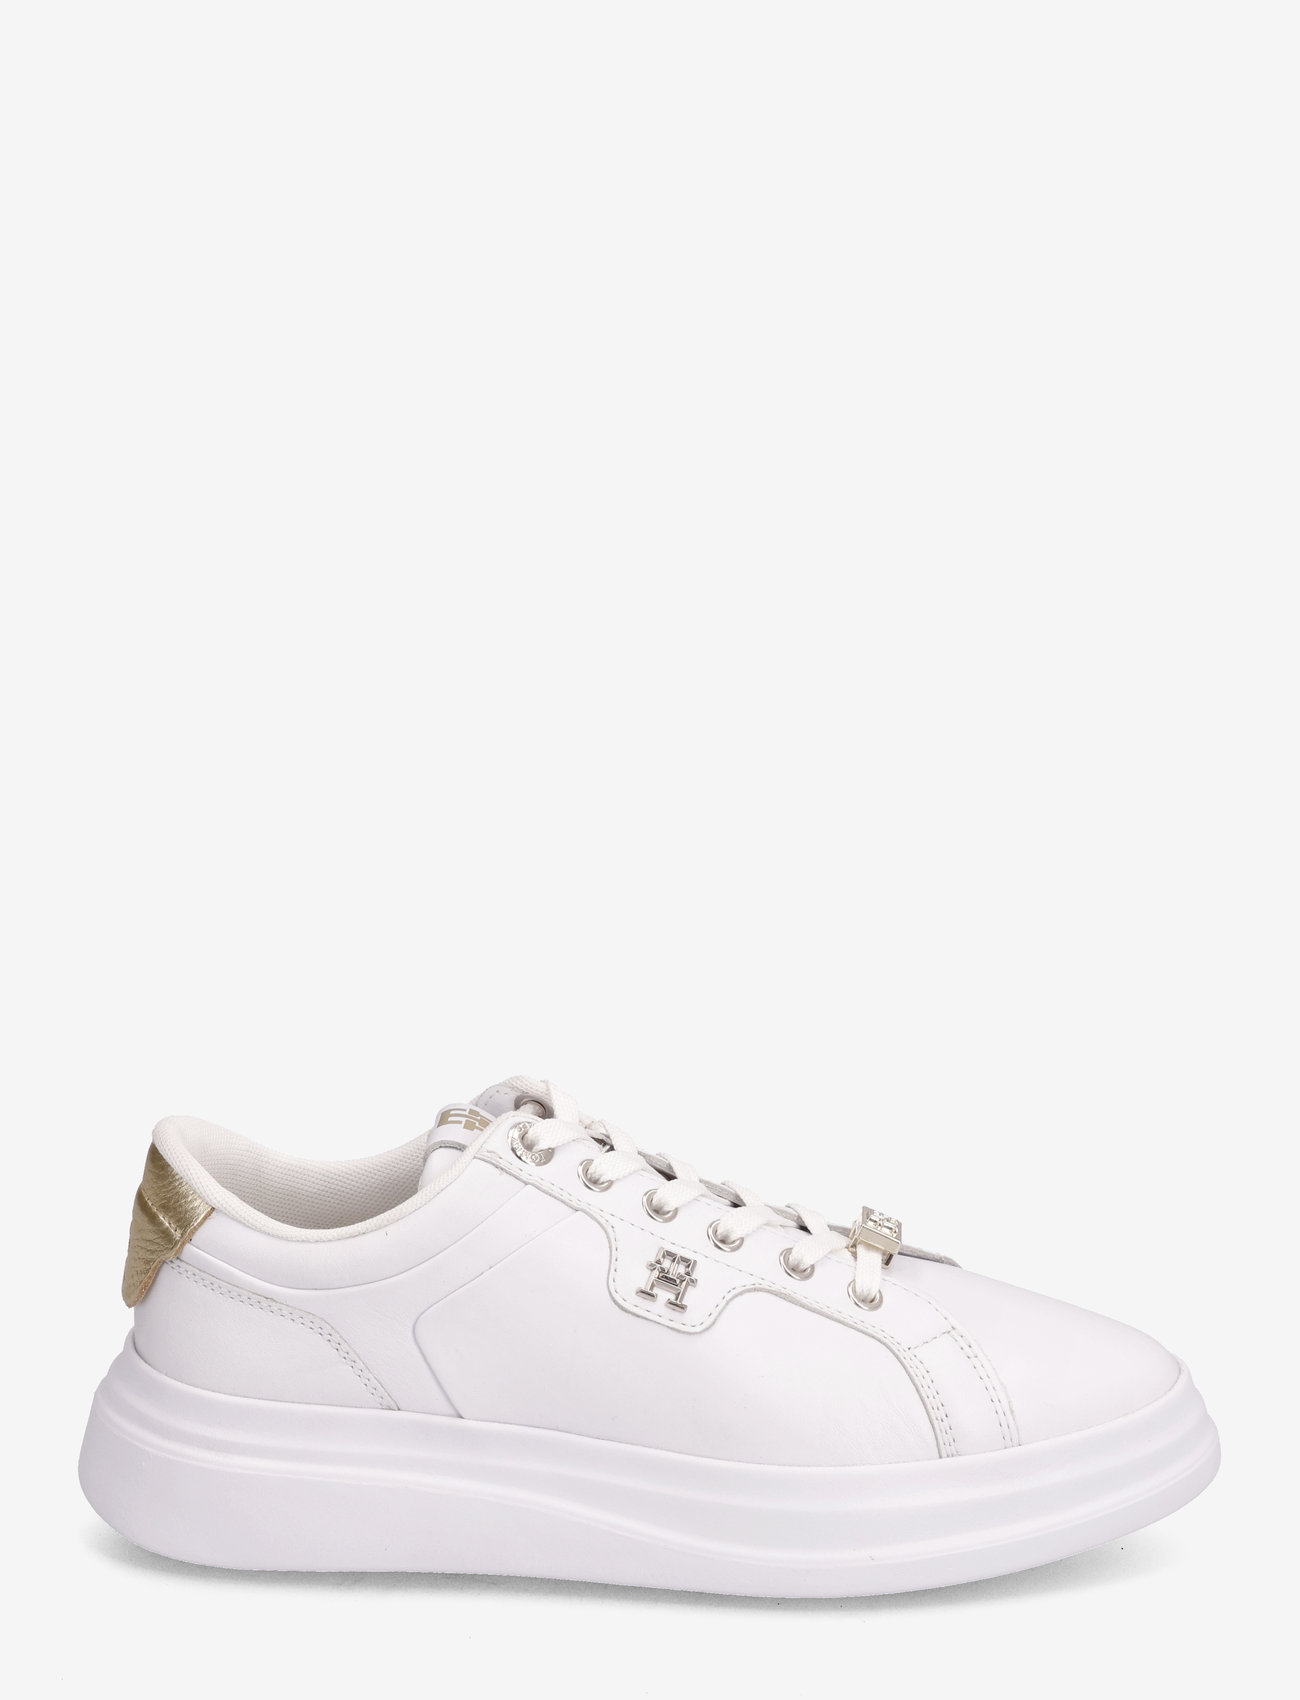 Tommy Hilfiger - POINTY COURT SNEAKER HARDWARE - niedrige sneakers - white/gold - 1